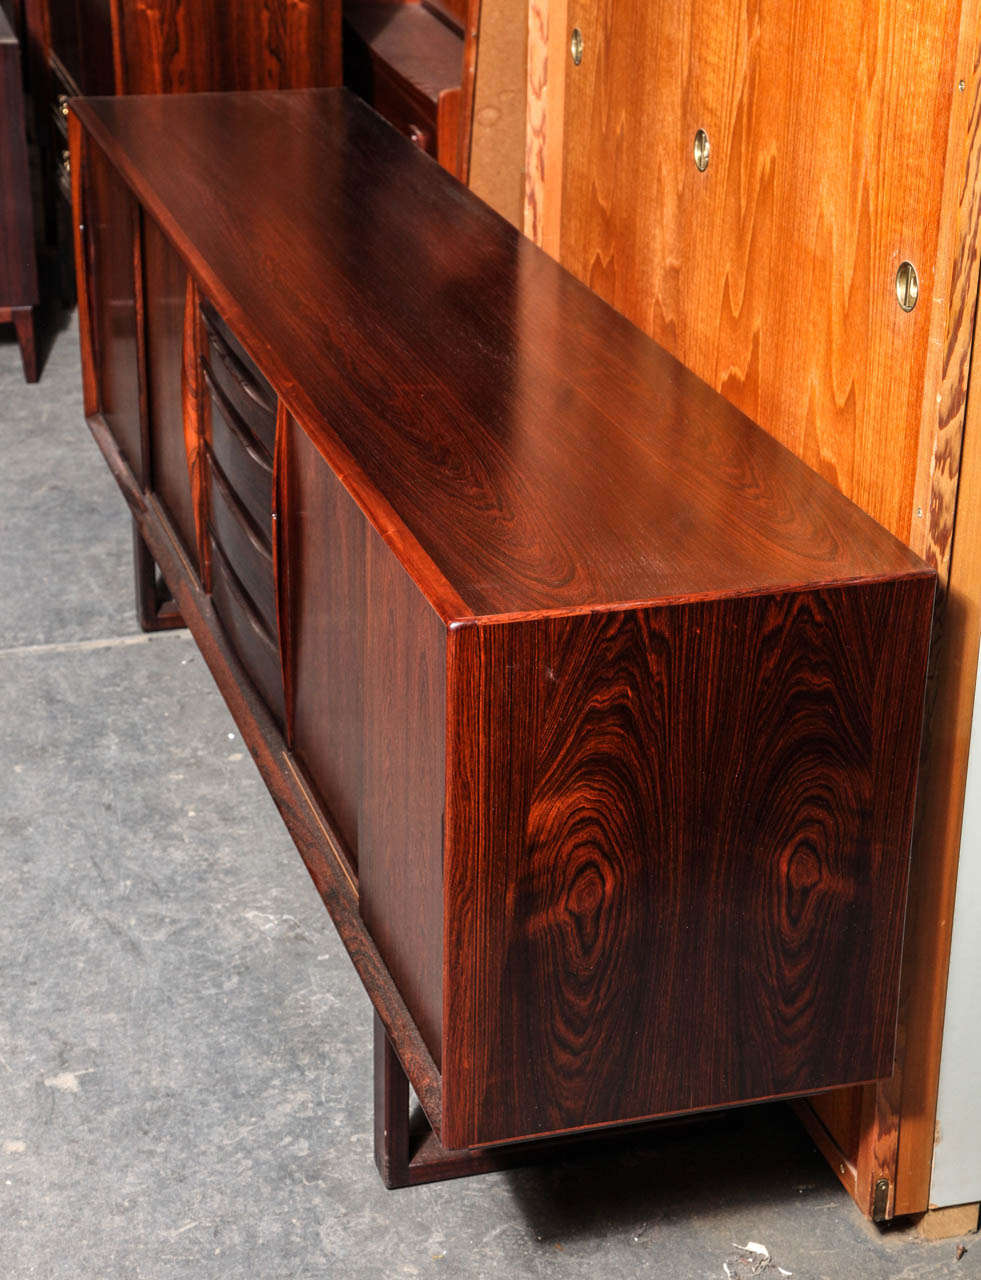 Vintage 1960s Danish Sideboard by Omann Jun.

This Vintage Credenza is in excellent, like-new condition. This works great as a entertainment unit, dining room buffet, or bedroom dresser. Ready to be picked up or delivered.